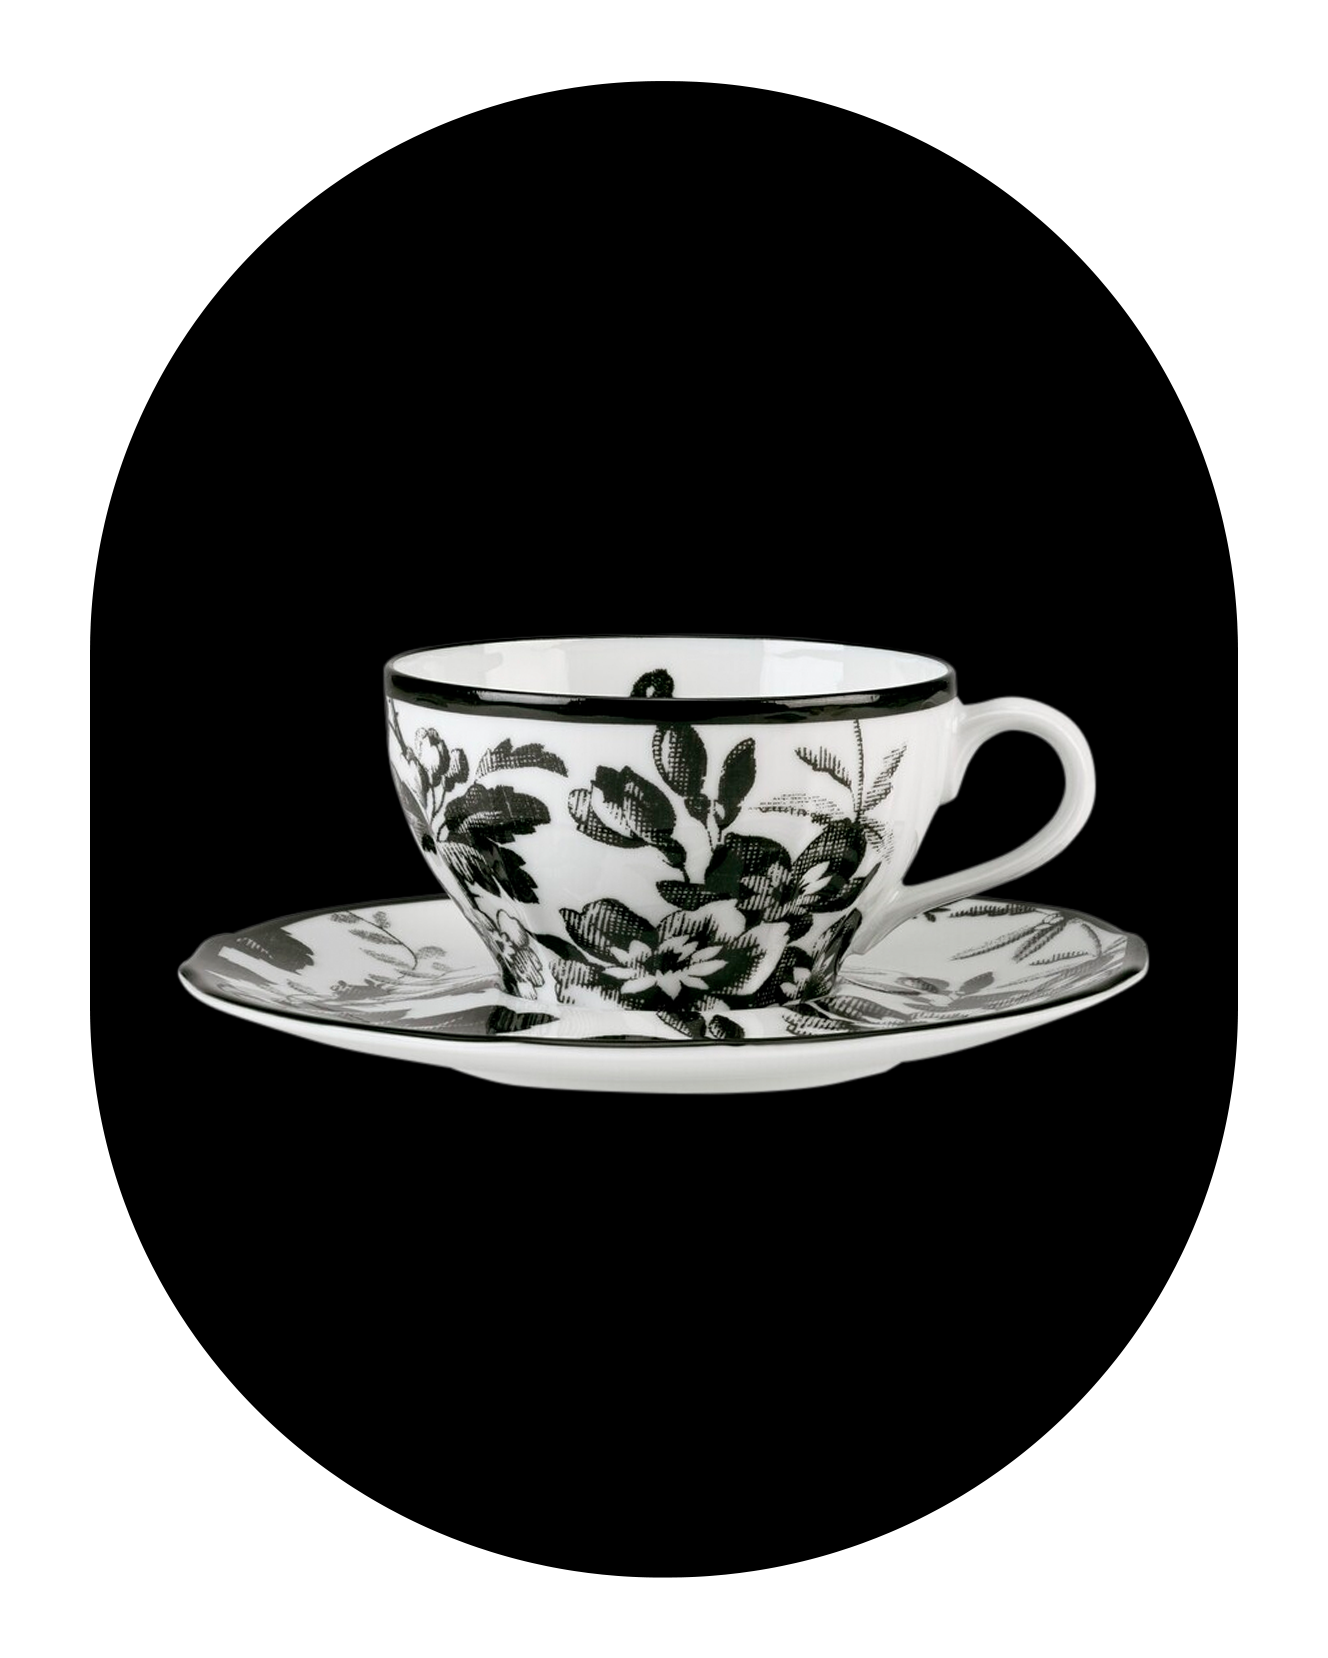 Herbarium teacup and saucer, set of two